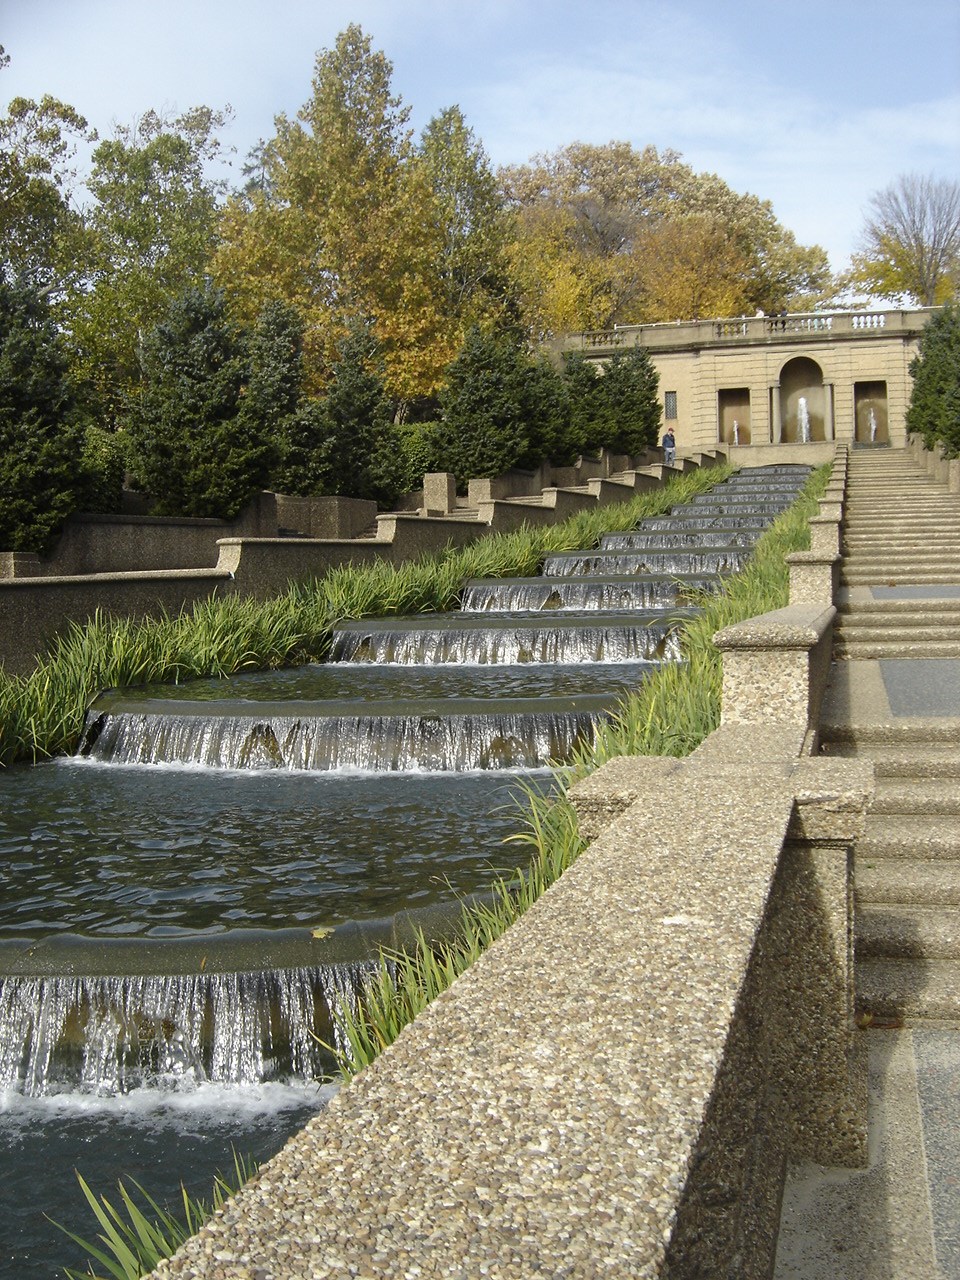 Water cascades through basins in the fountain at Meridian Hill Park. Trees line the walkway